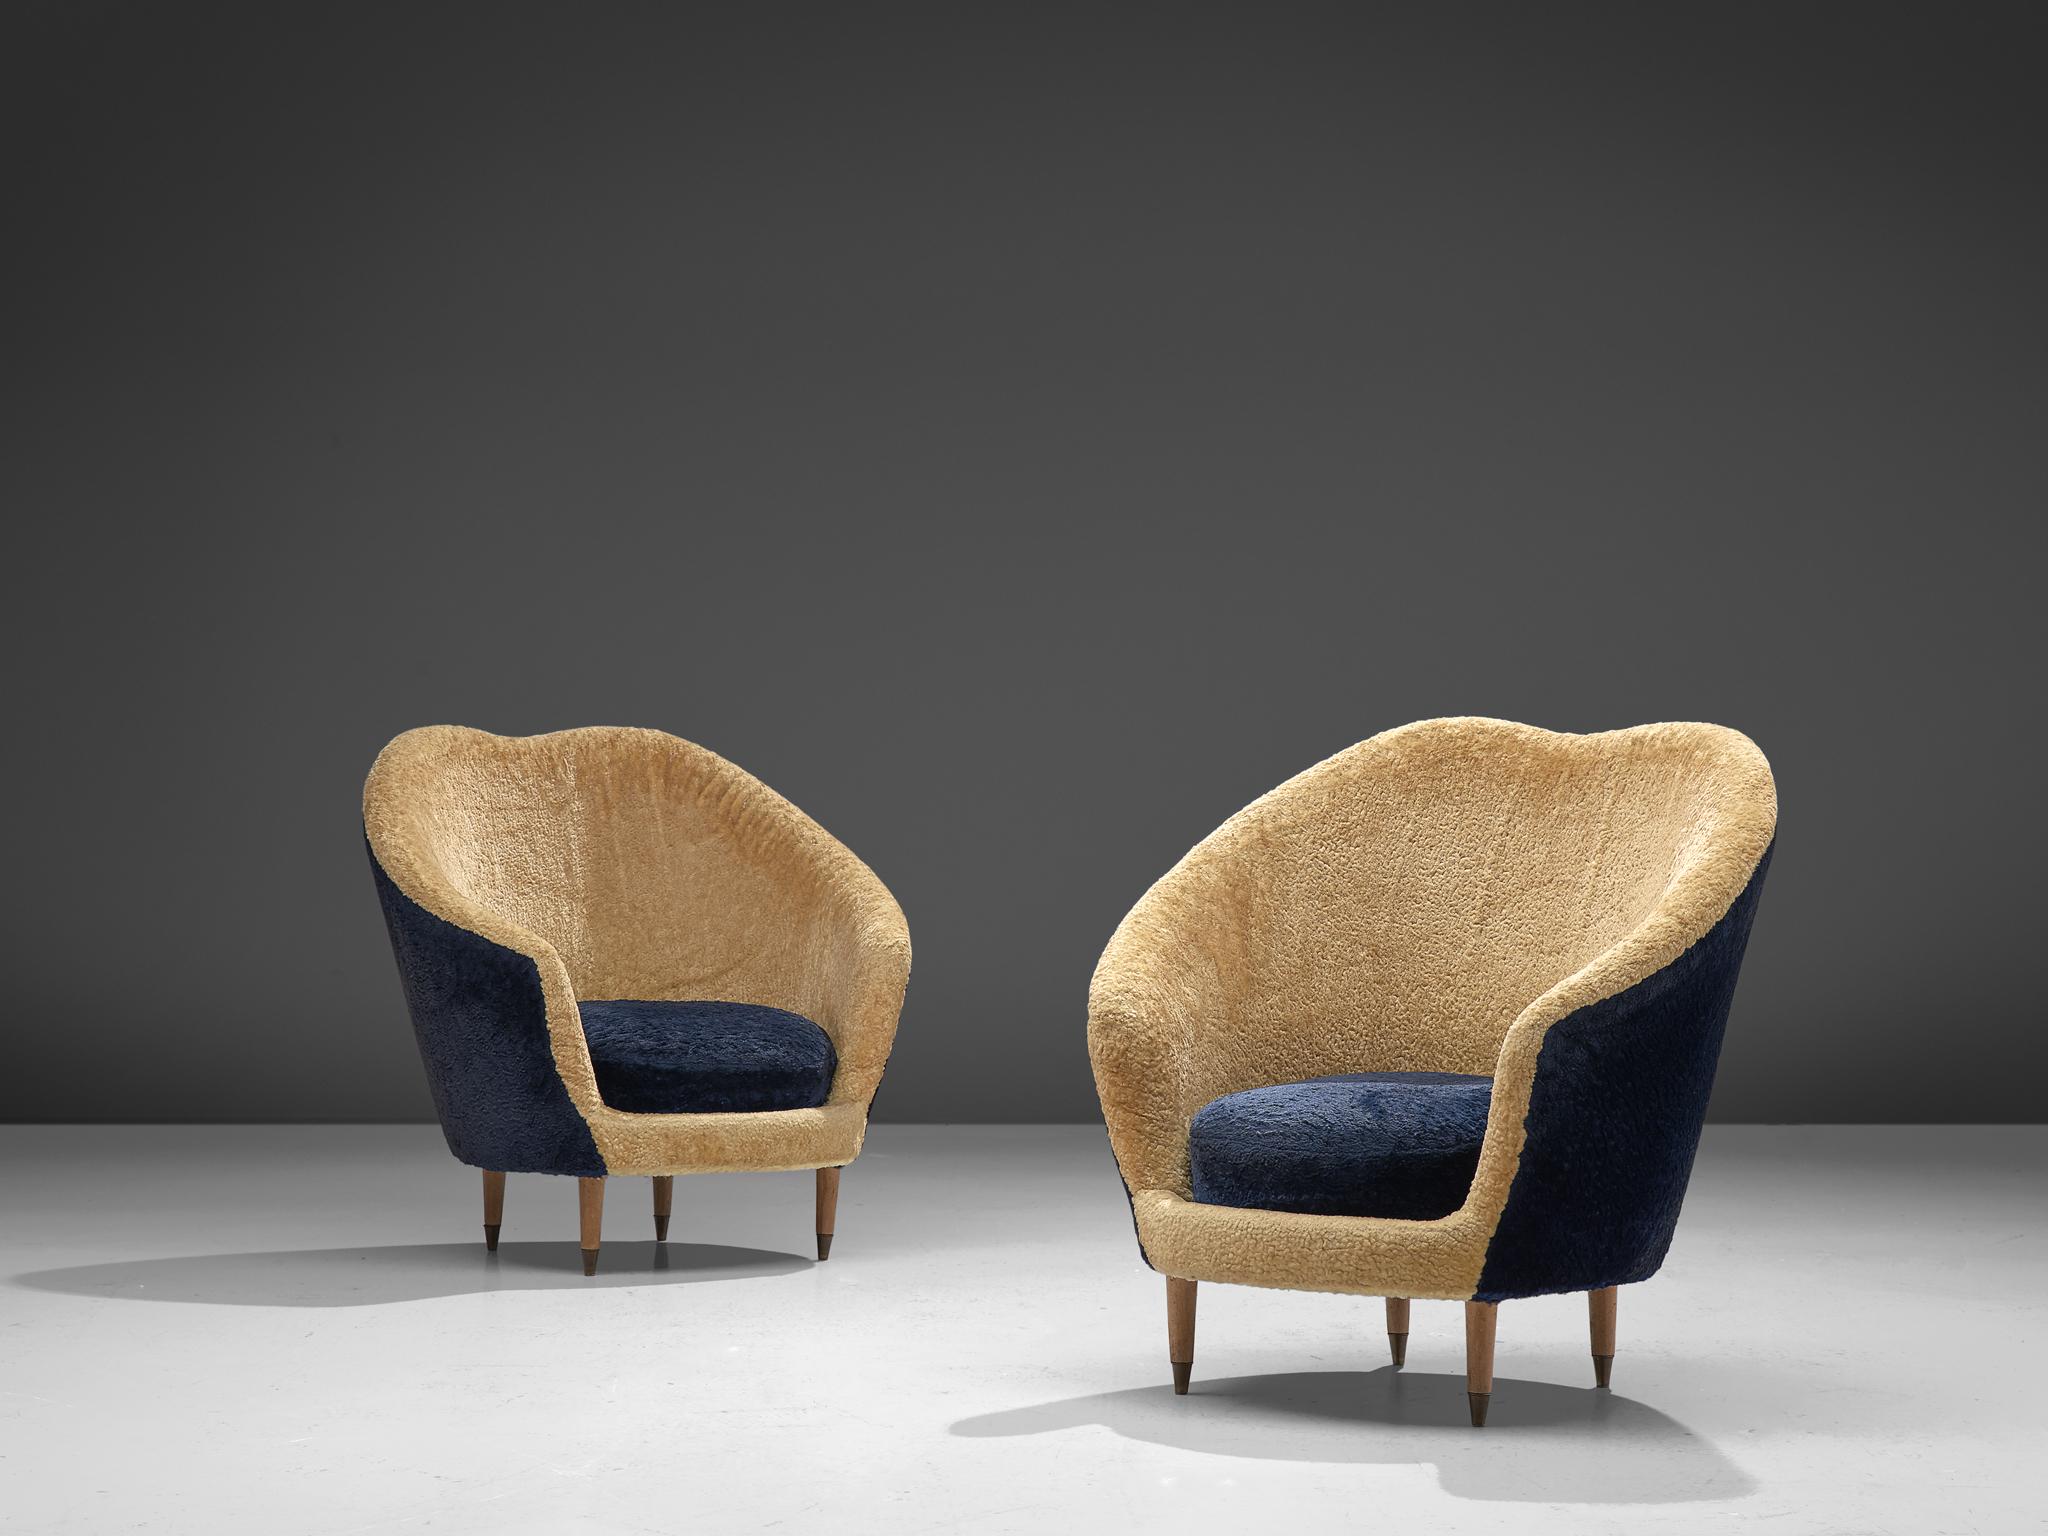 Federico Munari, pair of lounge chairs, velvet and brass, Italy, 1940s

This theatrical, elegant set of lounge chairs feature a curved, to ascended back that flows over to the armrests. The backrests are bold and high, which gives these chairs